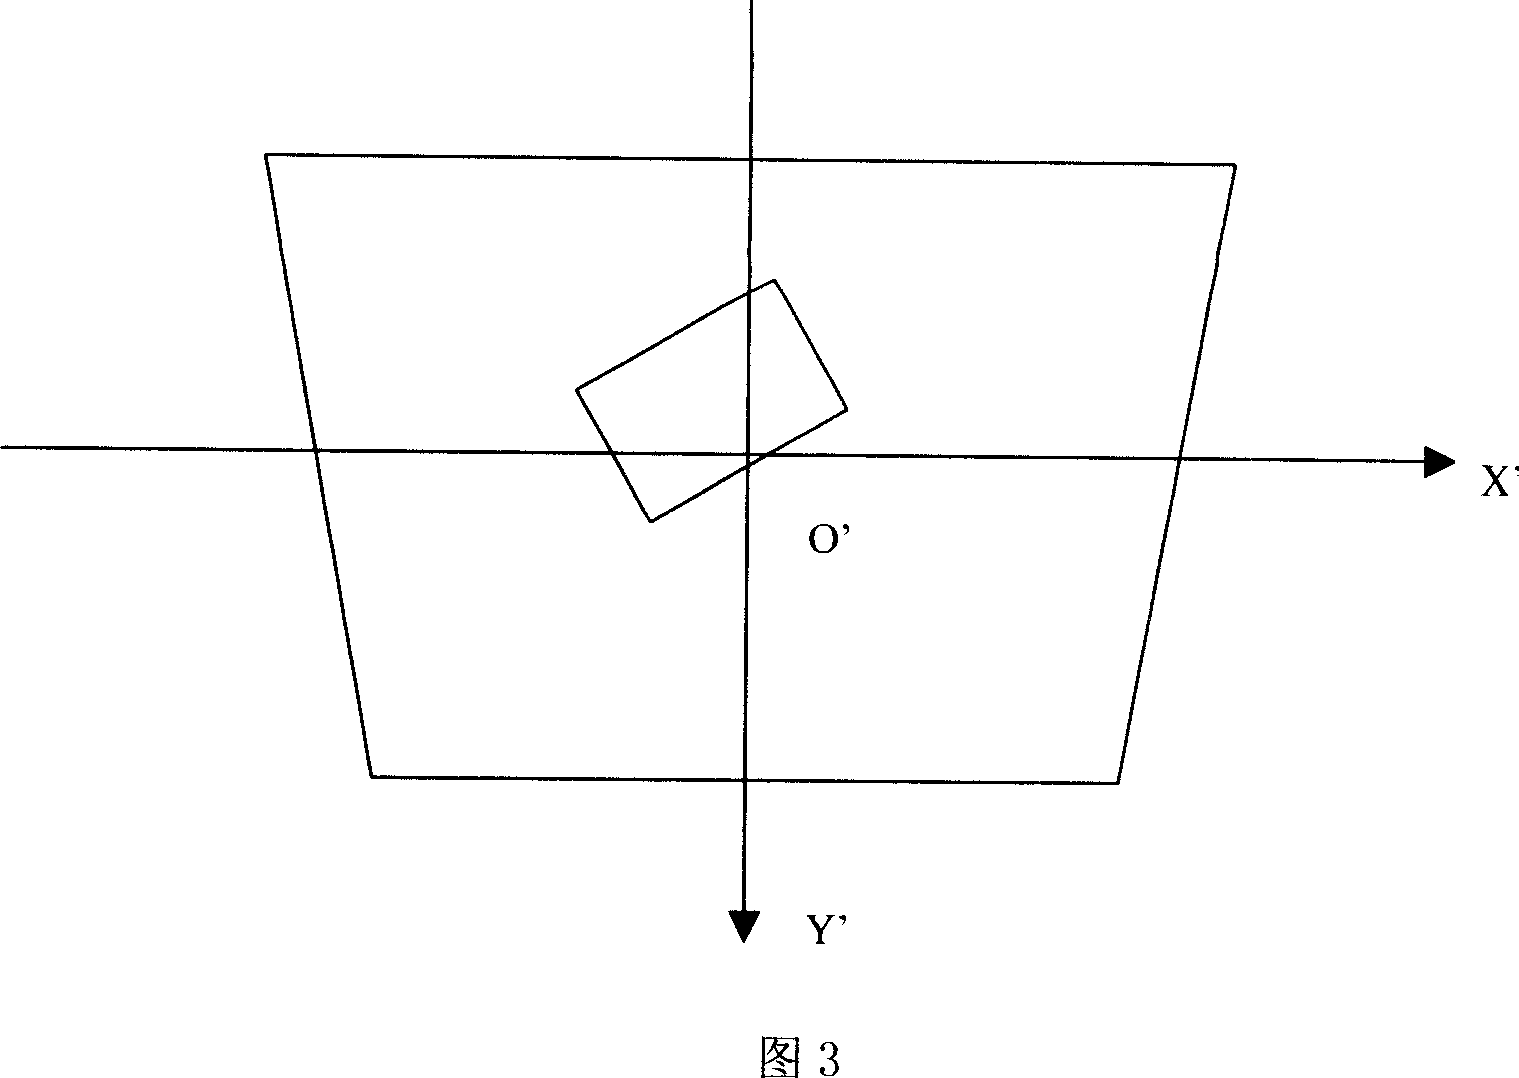 Image processing method for image distortion automatic correction